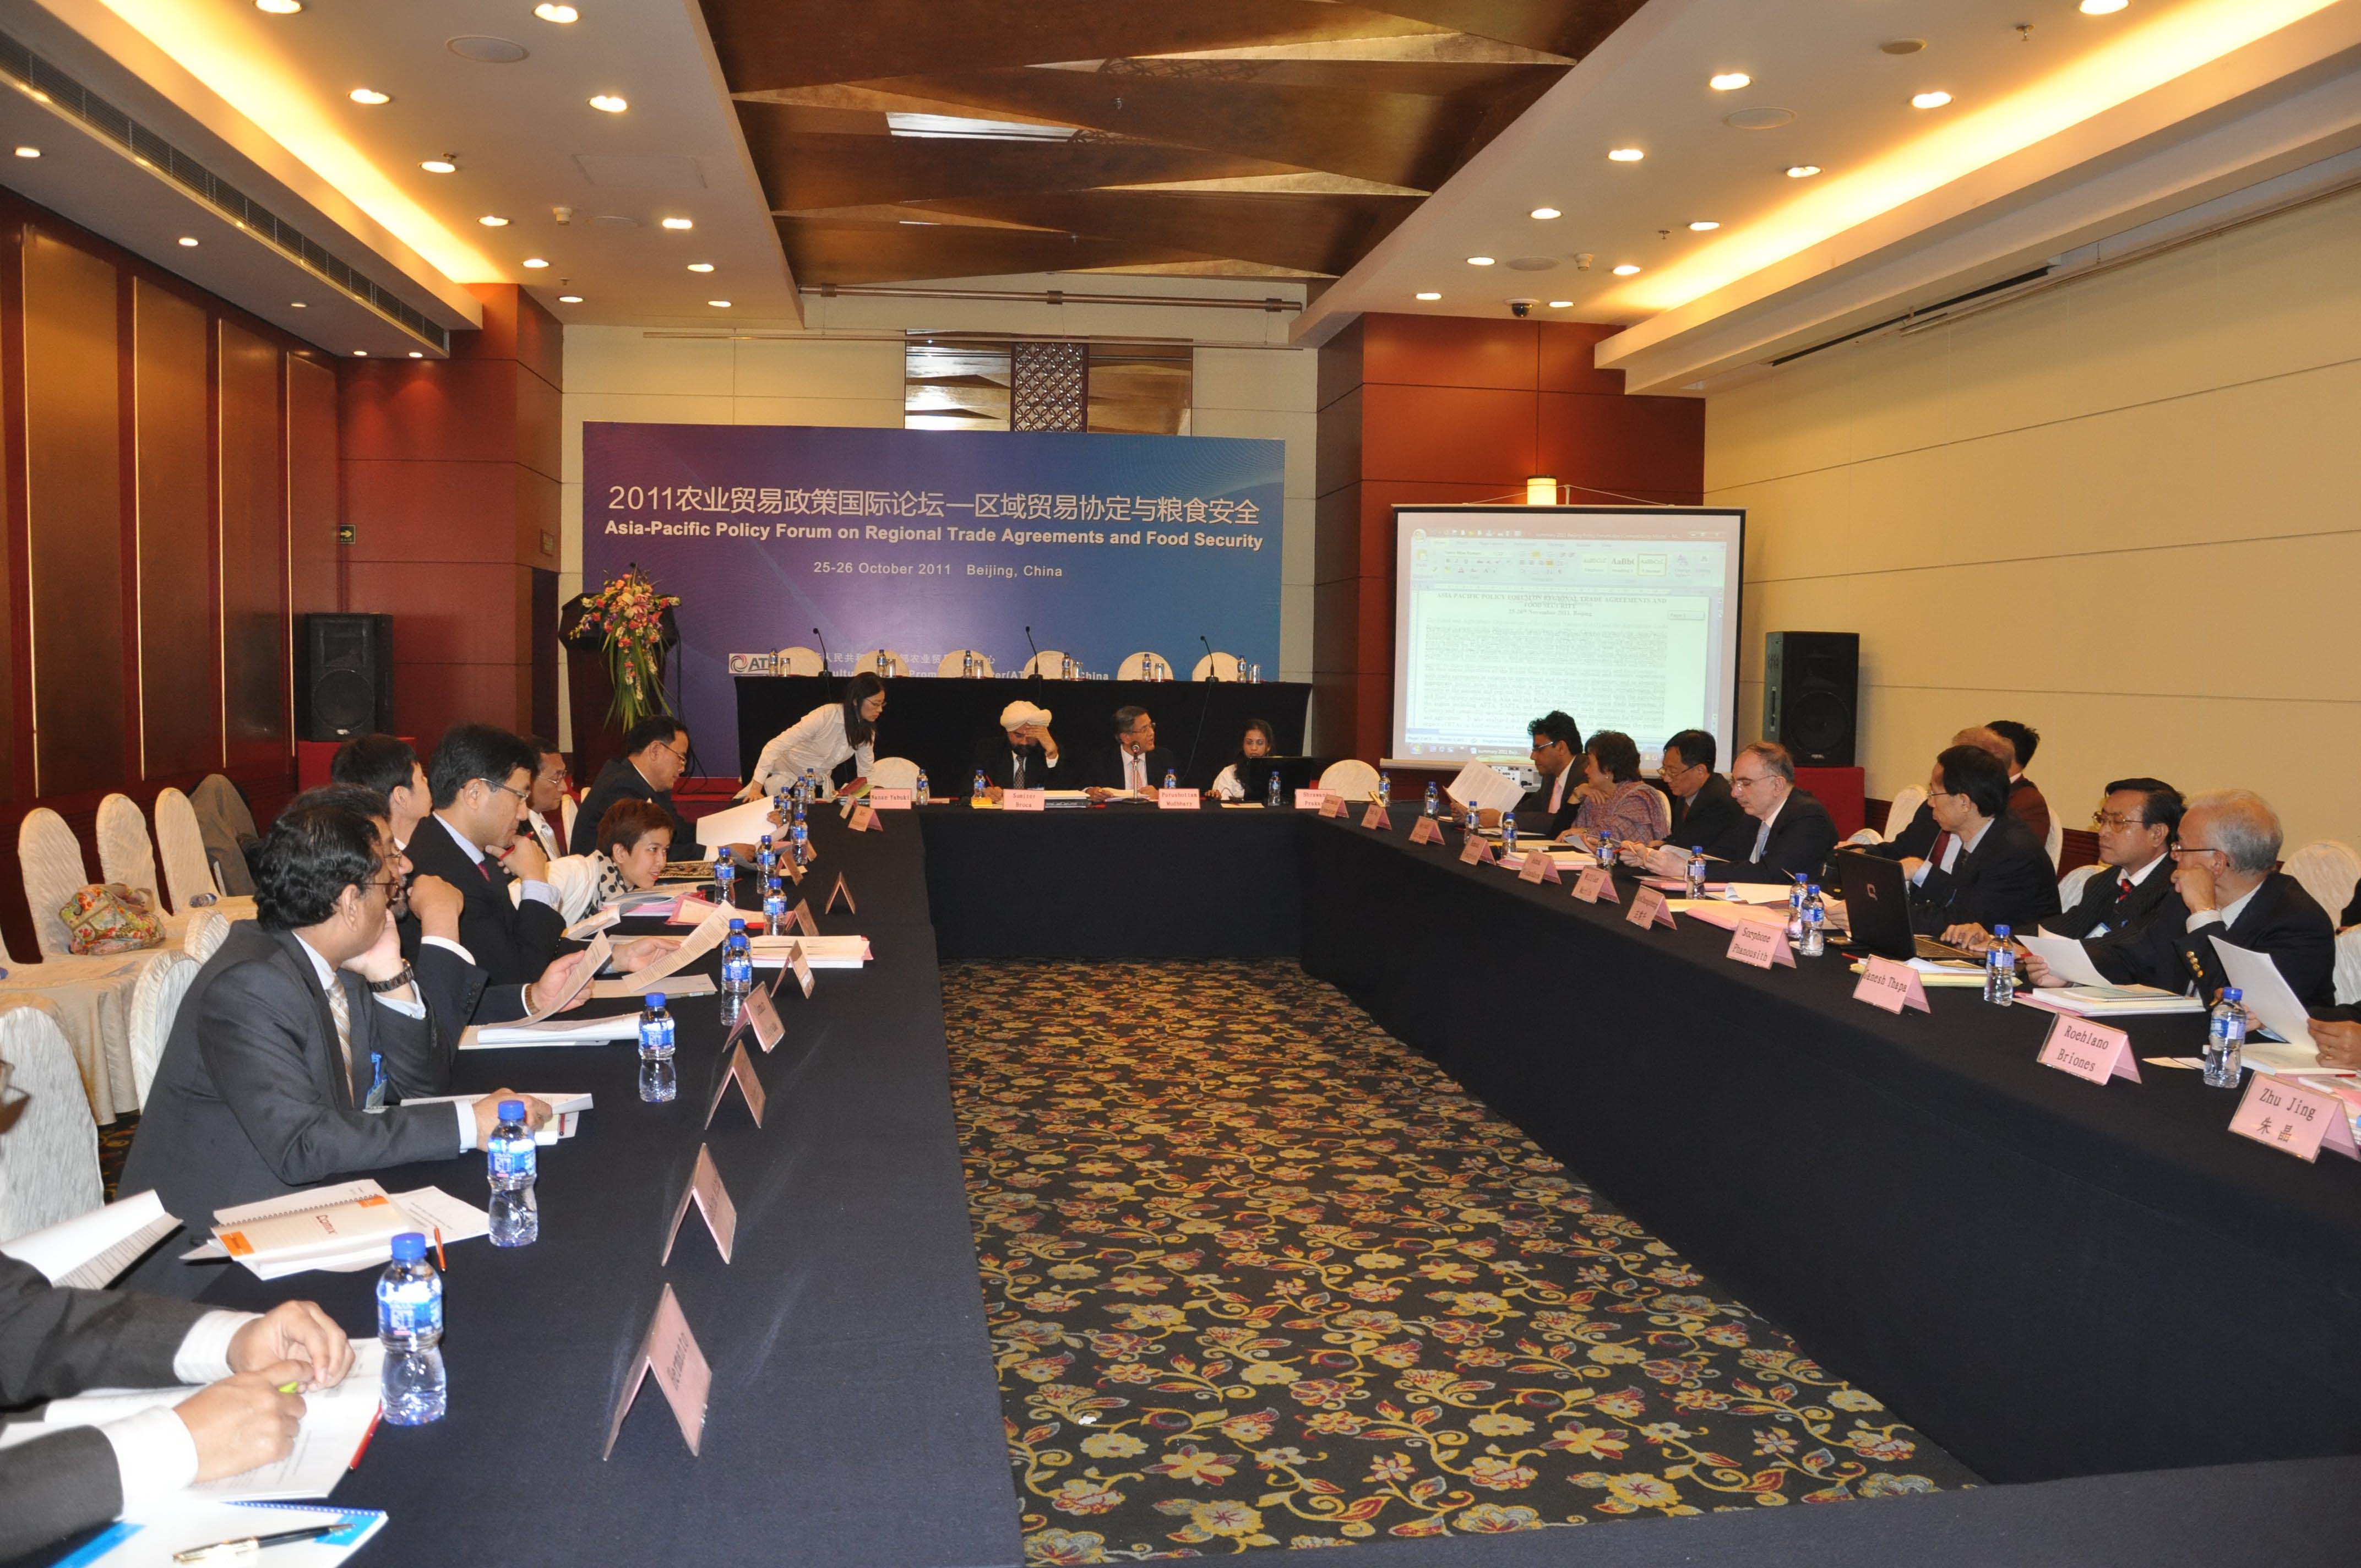 Asia-Pacific Policy Forum on Regional Trade Agreements and Food Security